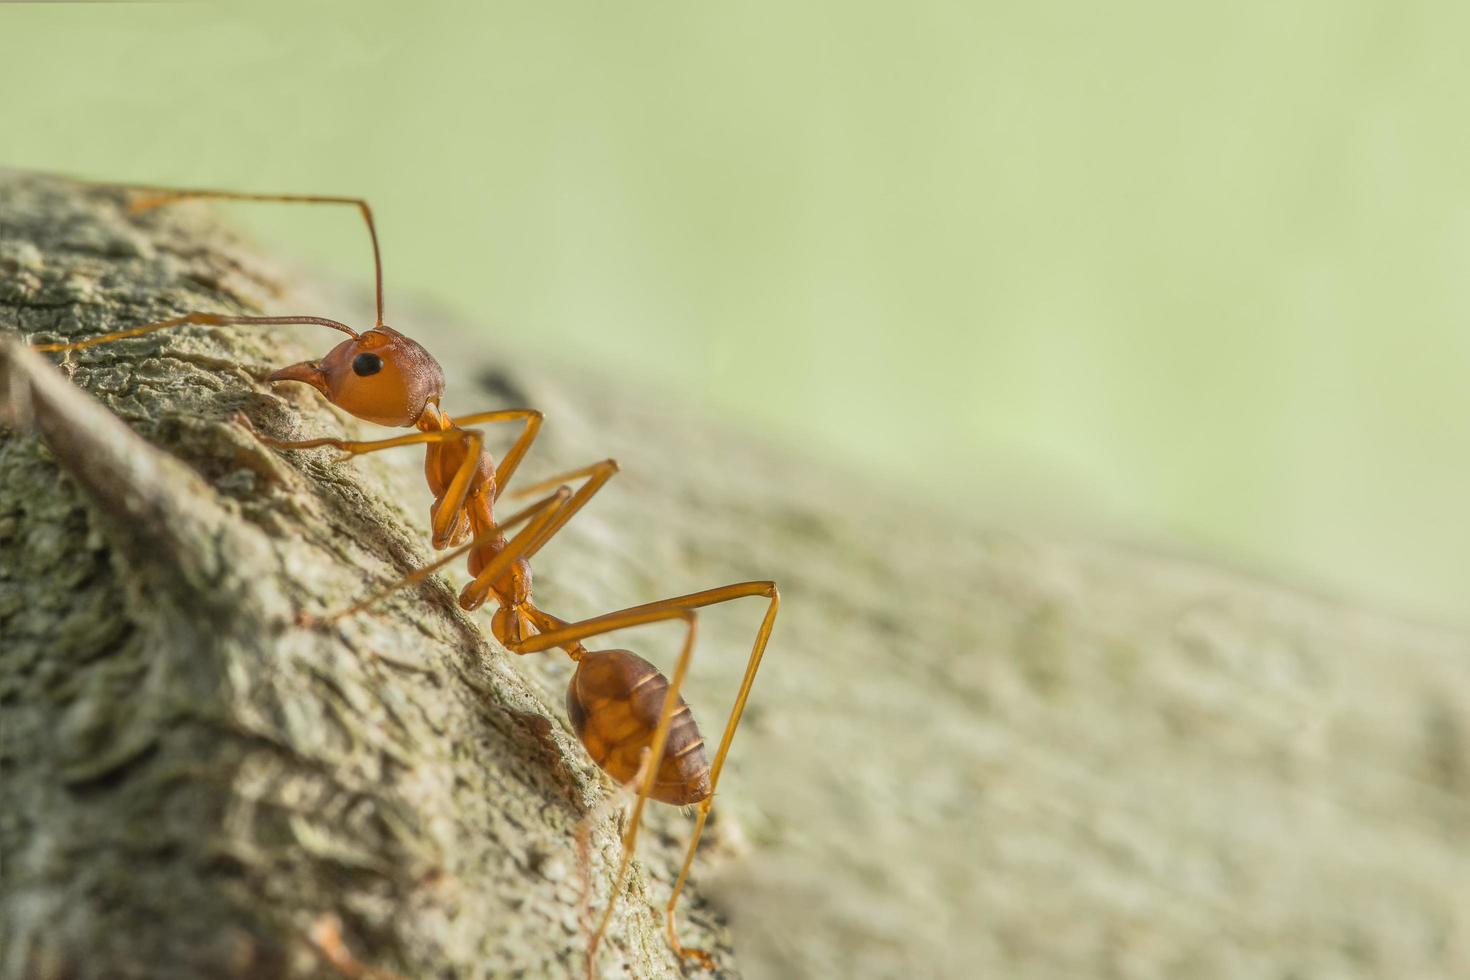 Ant on a tree, close-up photo